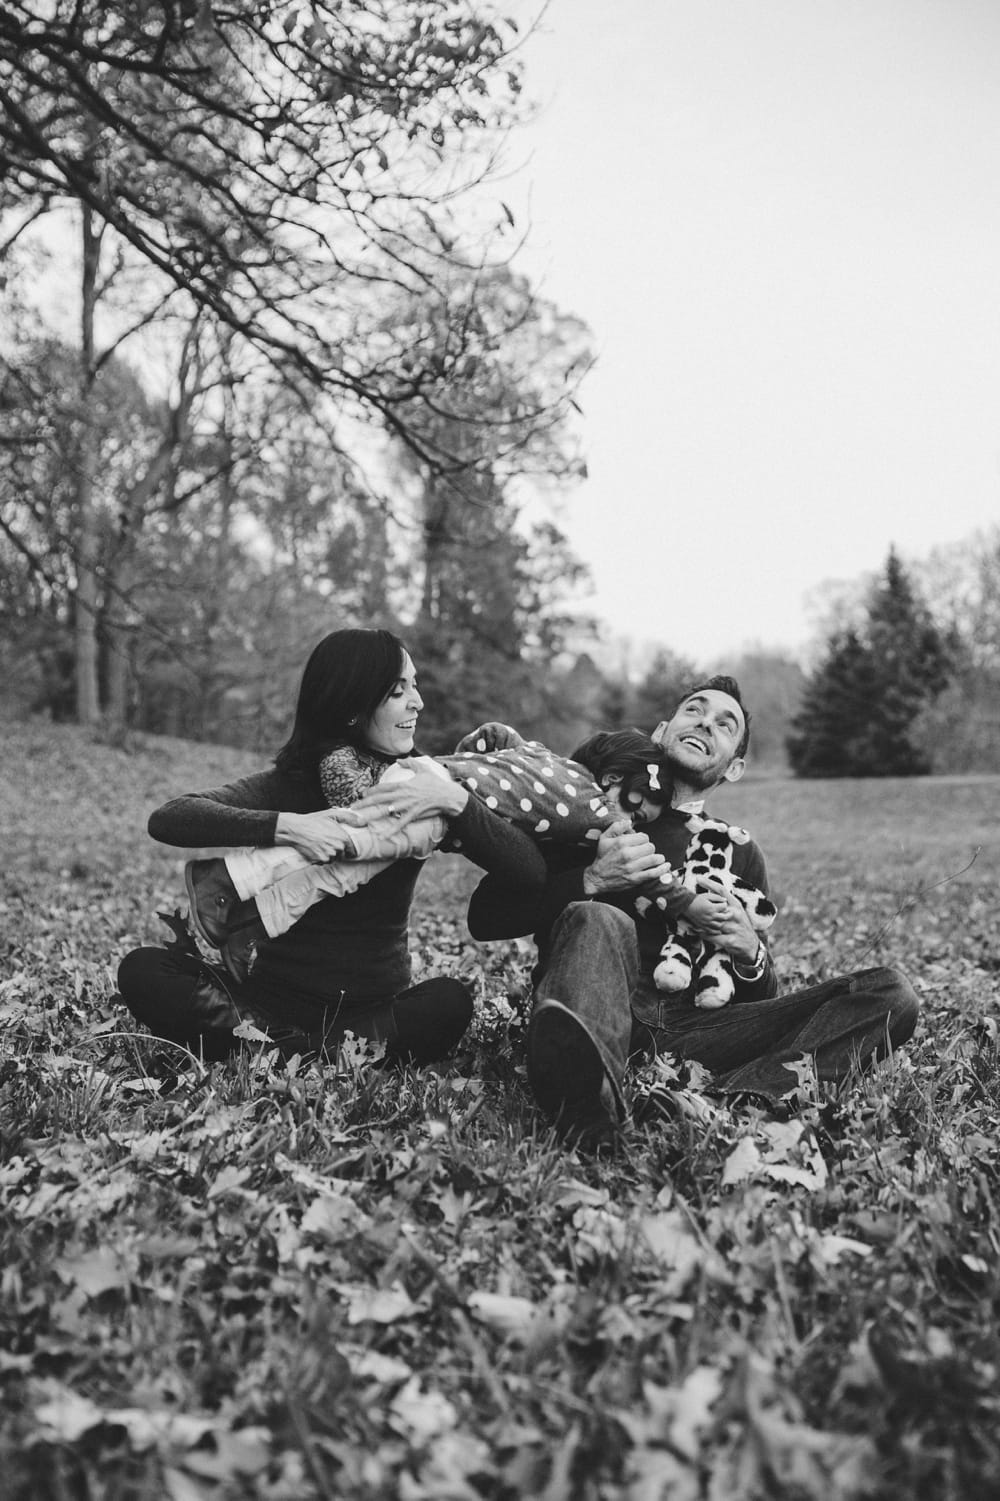 A fun lifestyle photograph of a family playing in the fallen leaves during a fall mini session at Boston's Arnold Arboretum in Jamaica Plain, Massachusetts